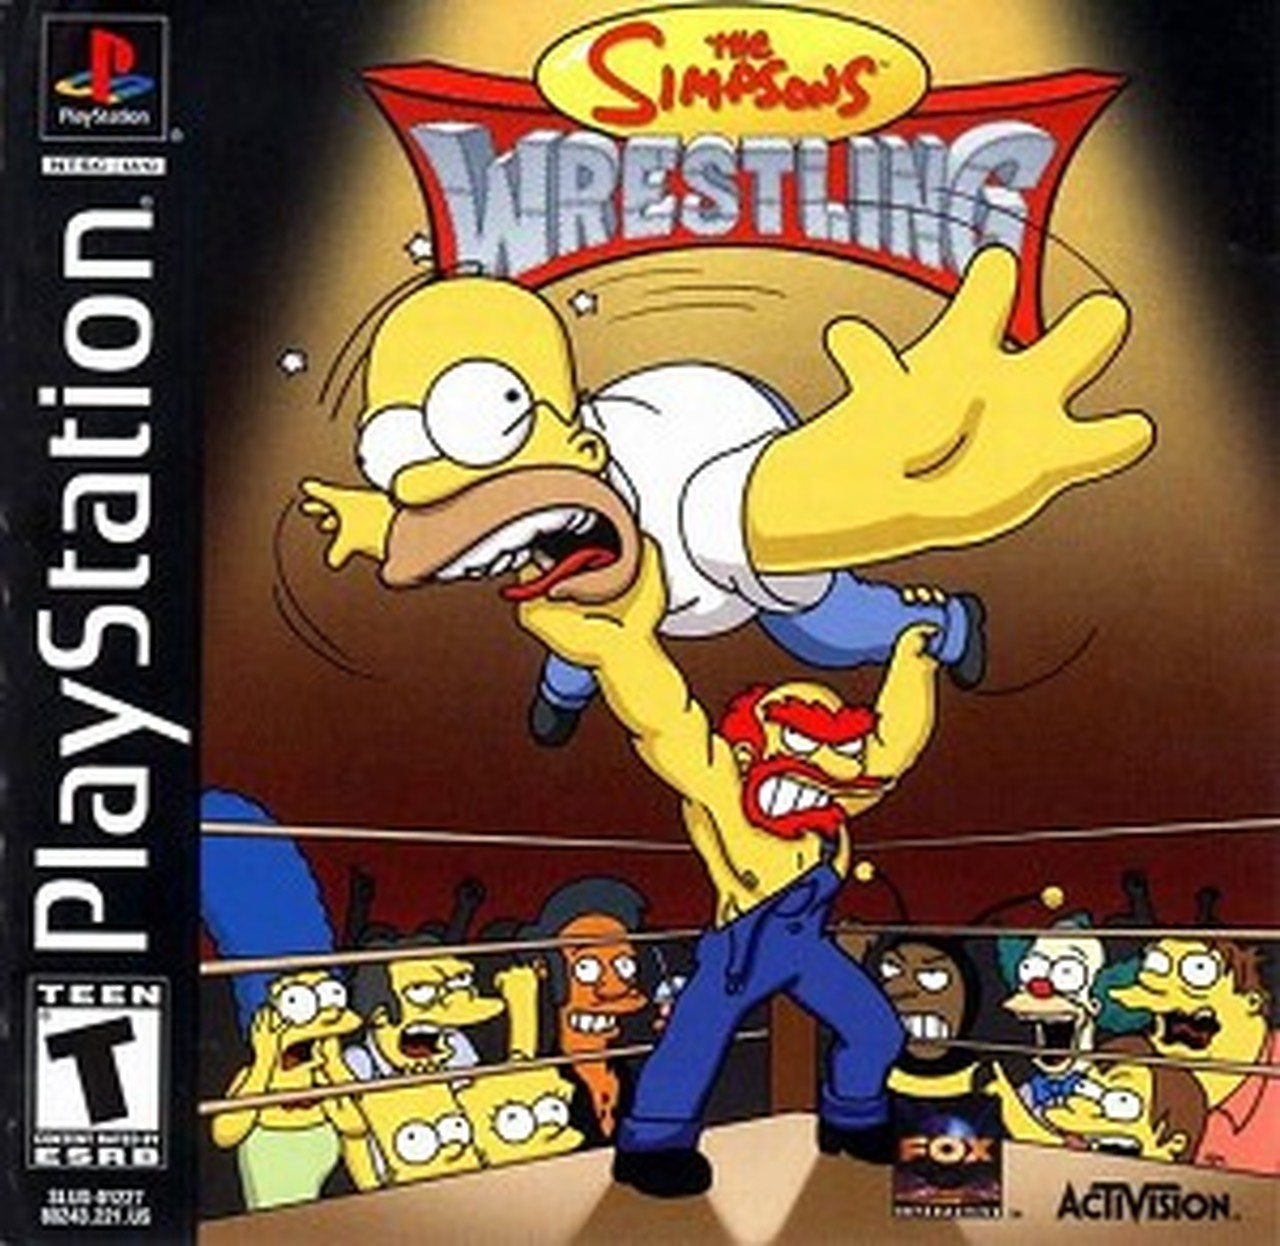 The Simpsons Wrestling Manual